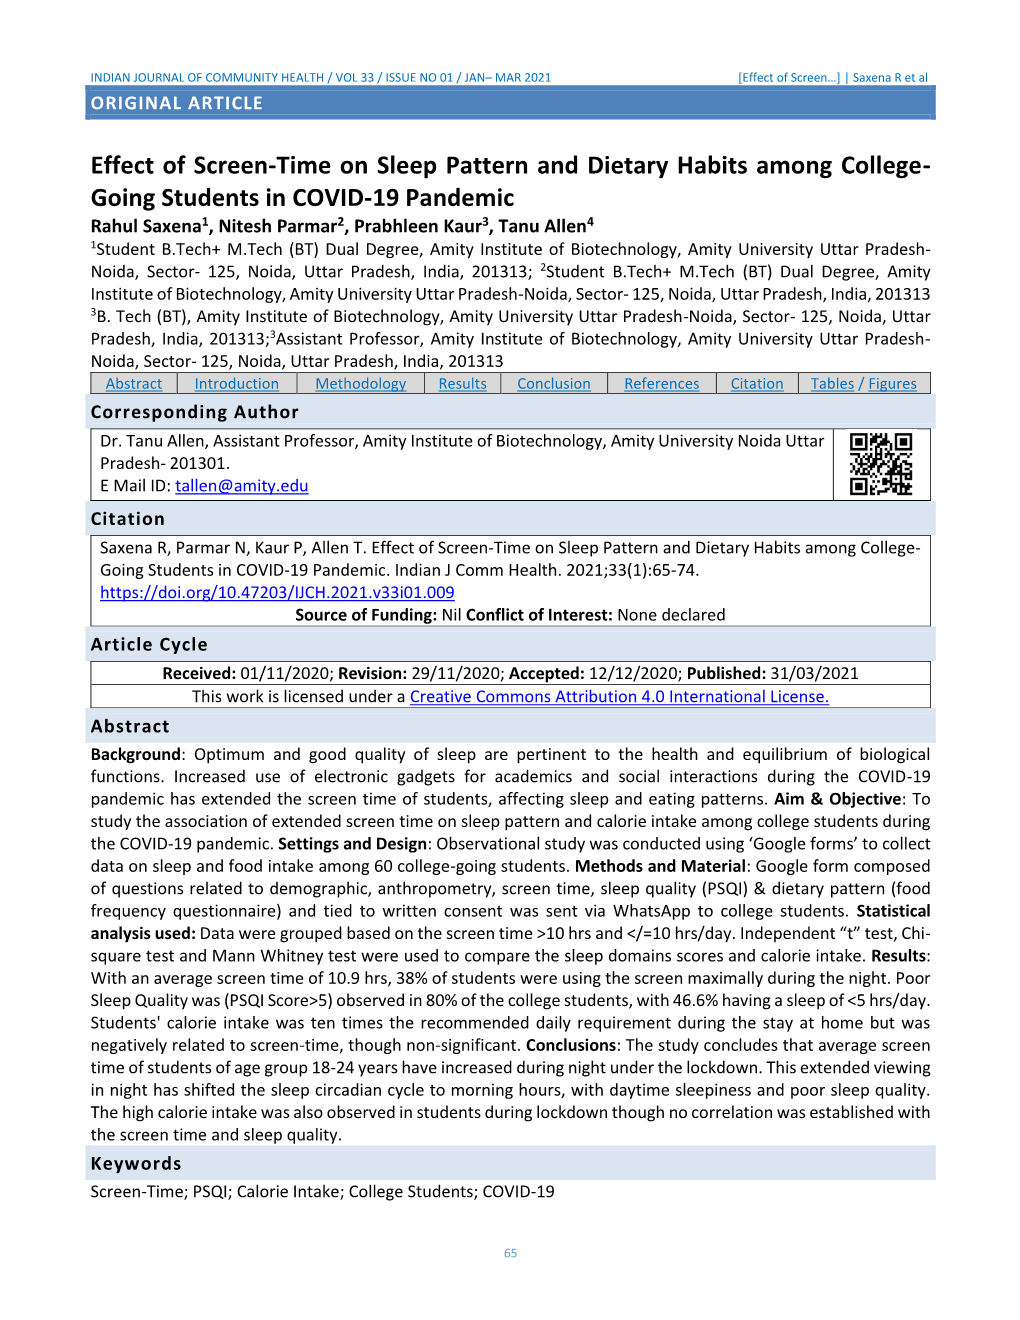 Effect of Screen-Time on Sleep Pattern and Dietary Habits Among